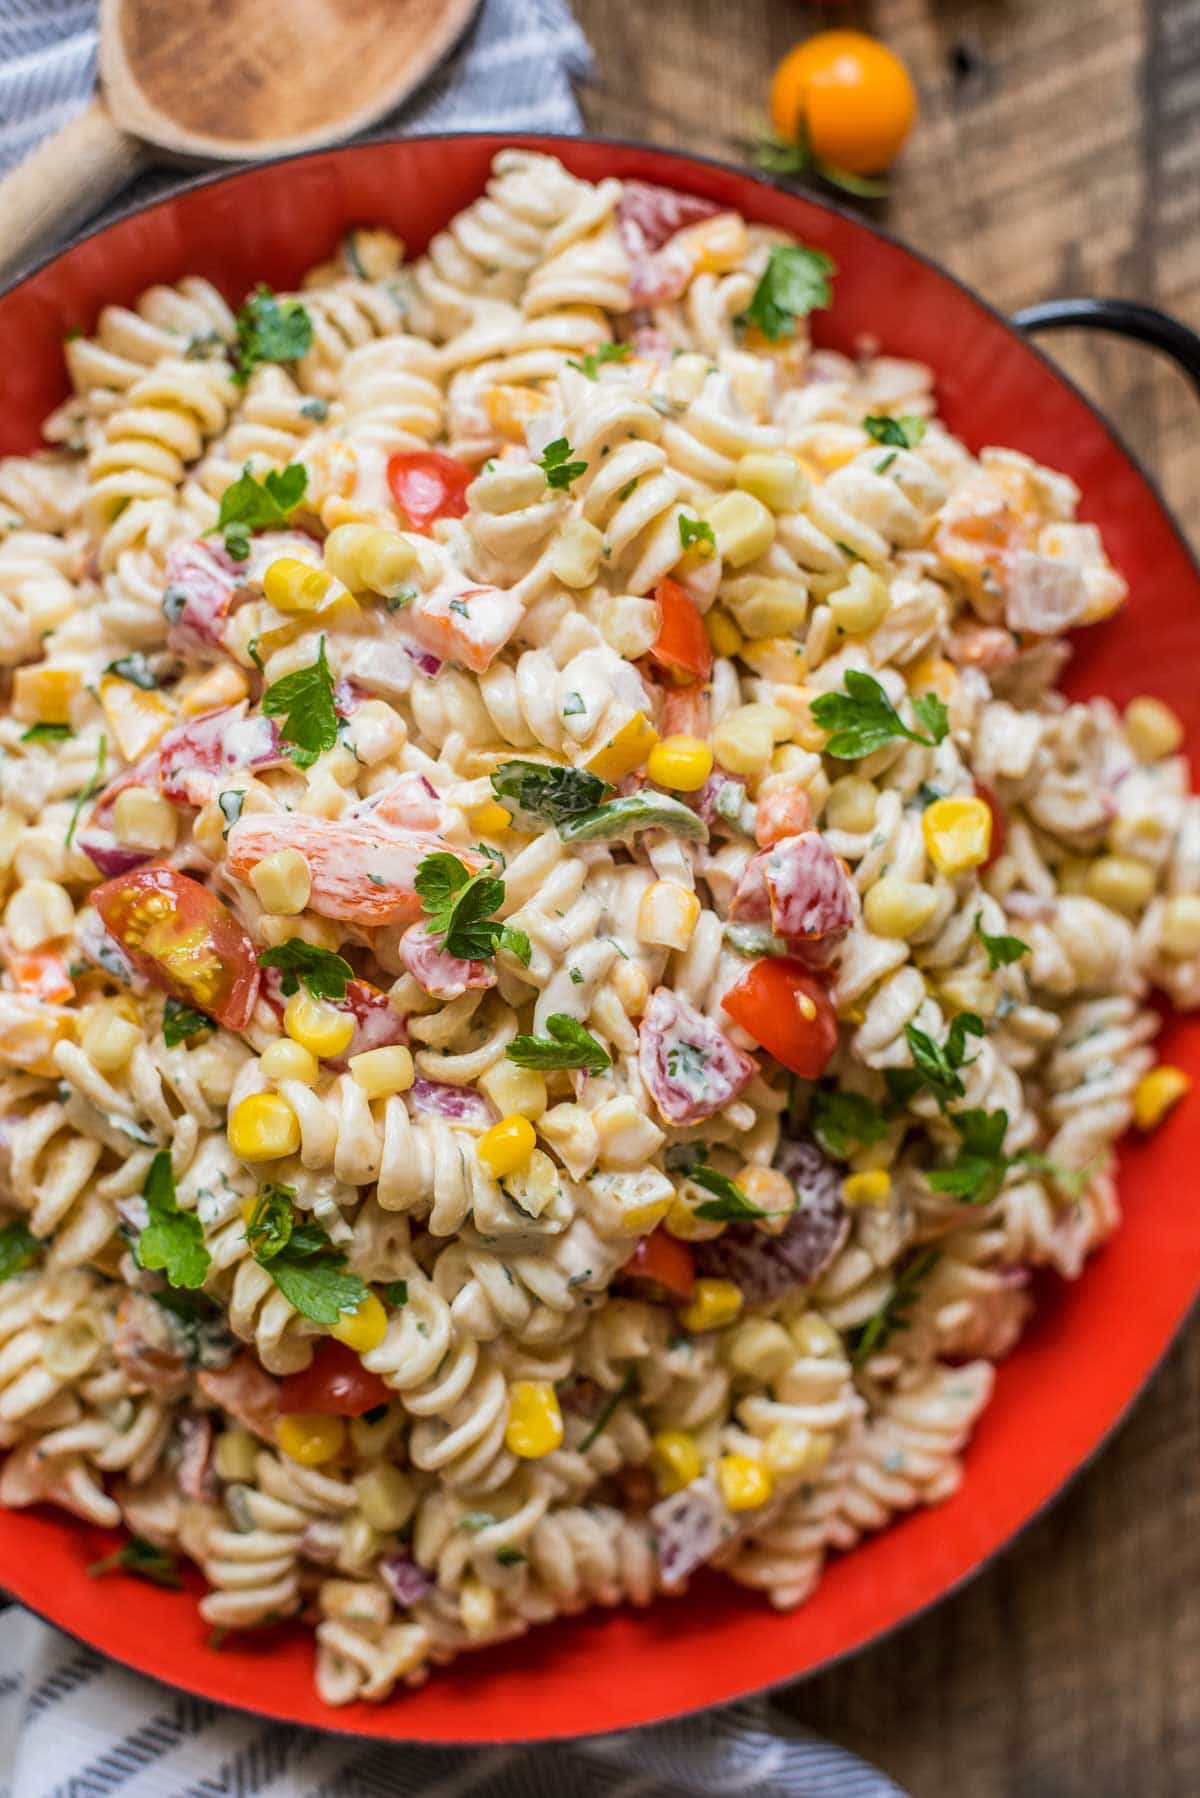 This Southwest Pasta Salad with Cilantro Ranch is full of zesty flavor and perfect for summer picnics!